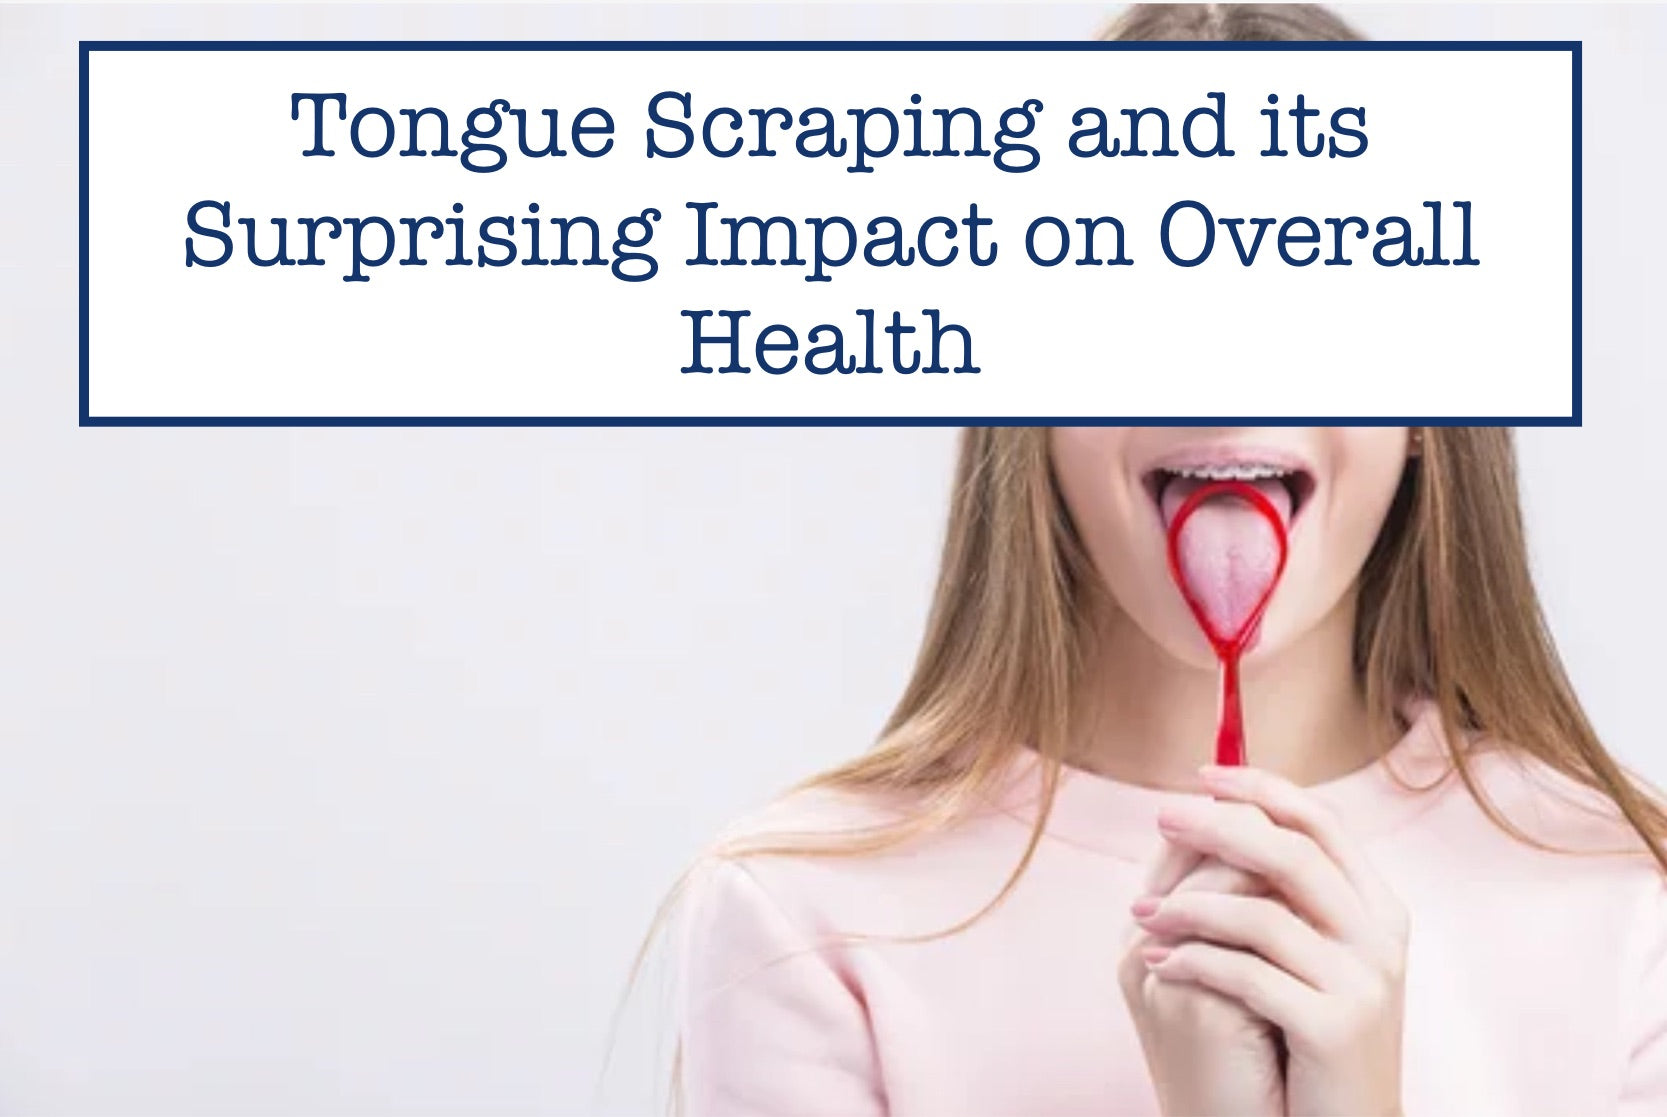 Tongue Scraping and its Surprising Impact on Overall Health